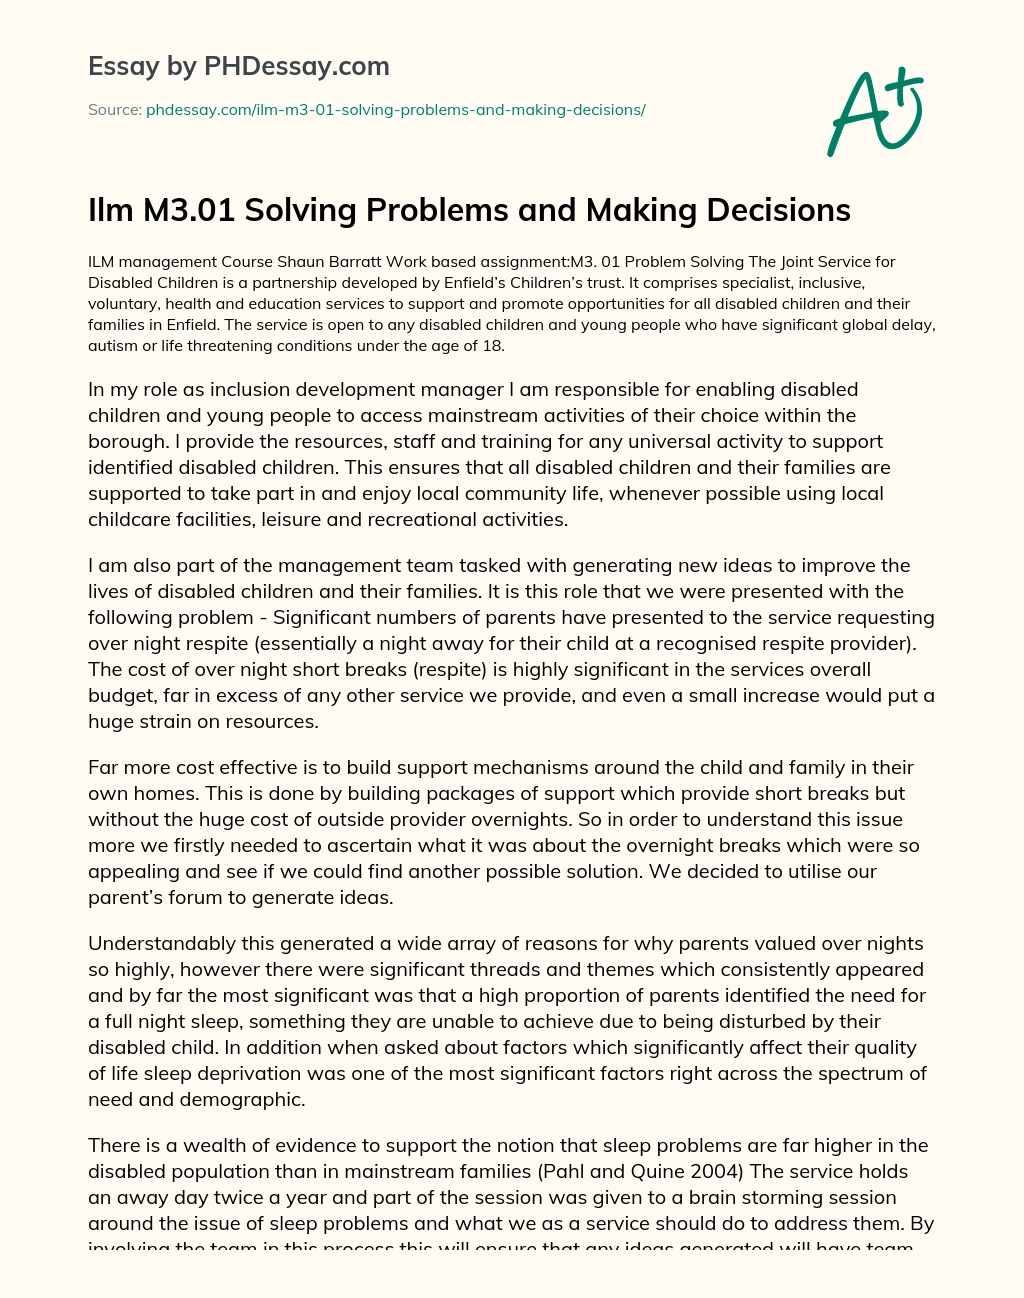 ilm solving problems and making decisions essay